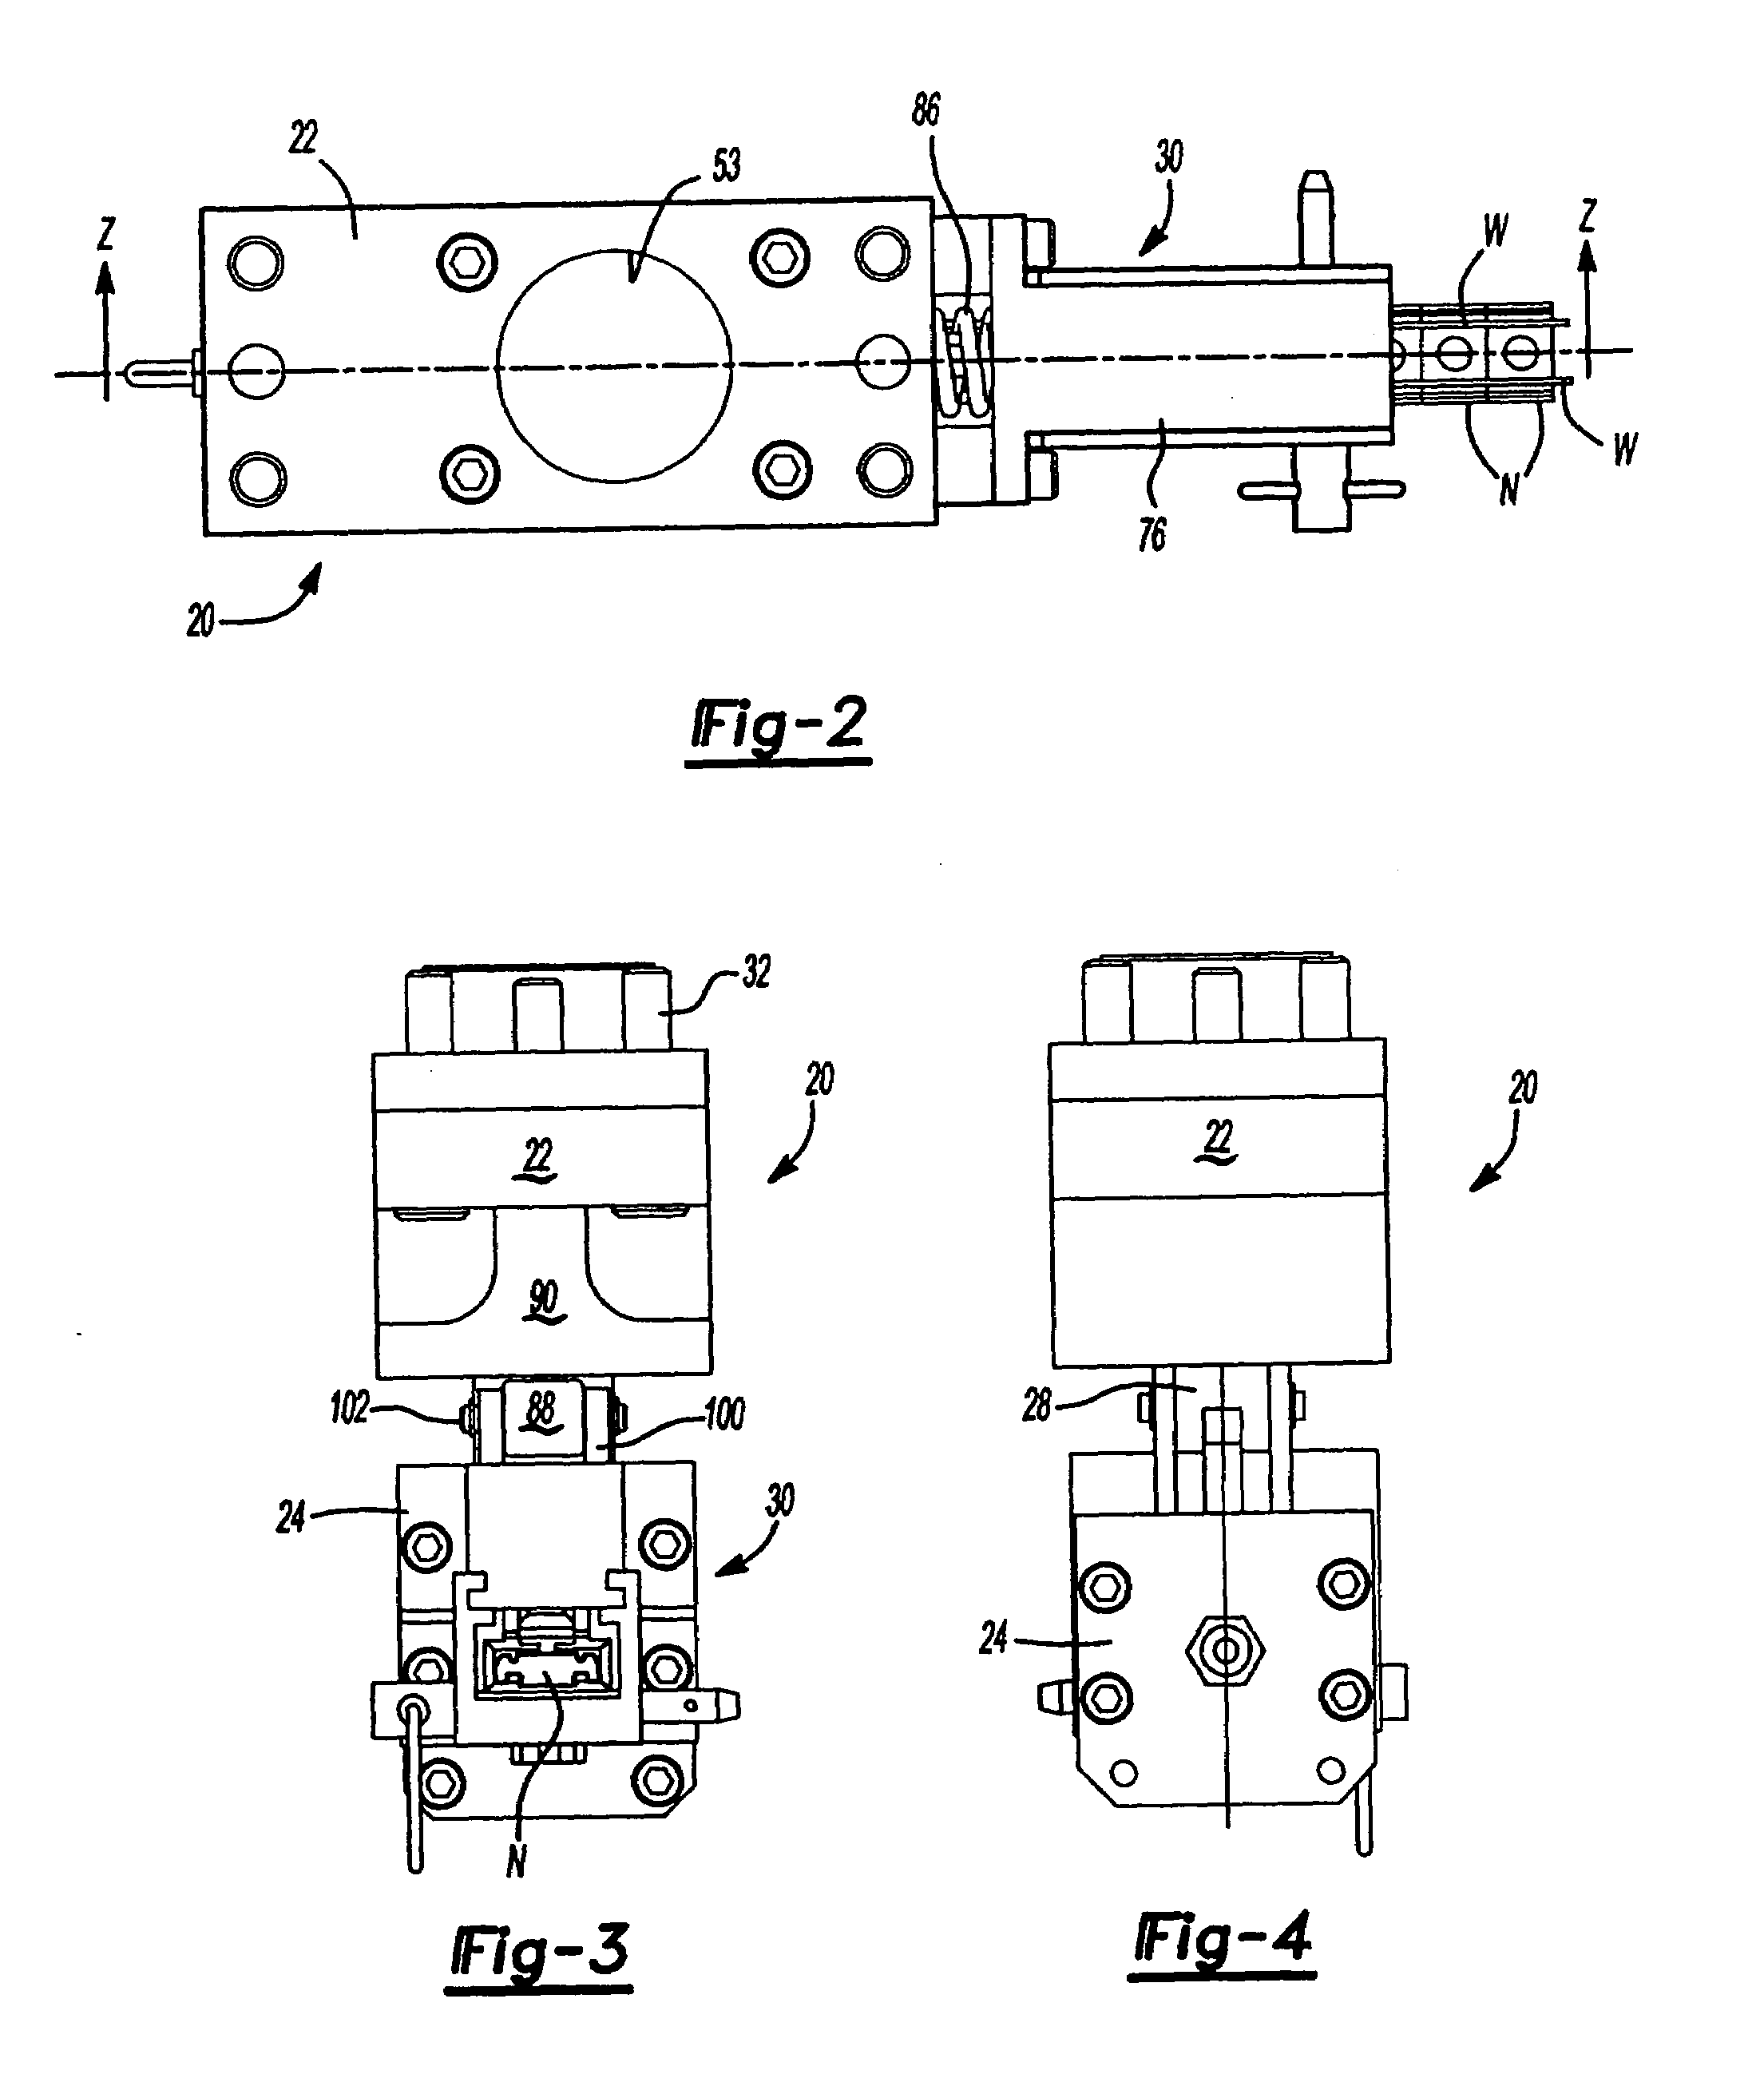 Method of feeding and installing self-attaching nuts